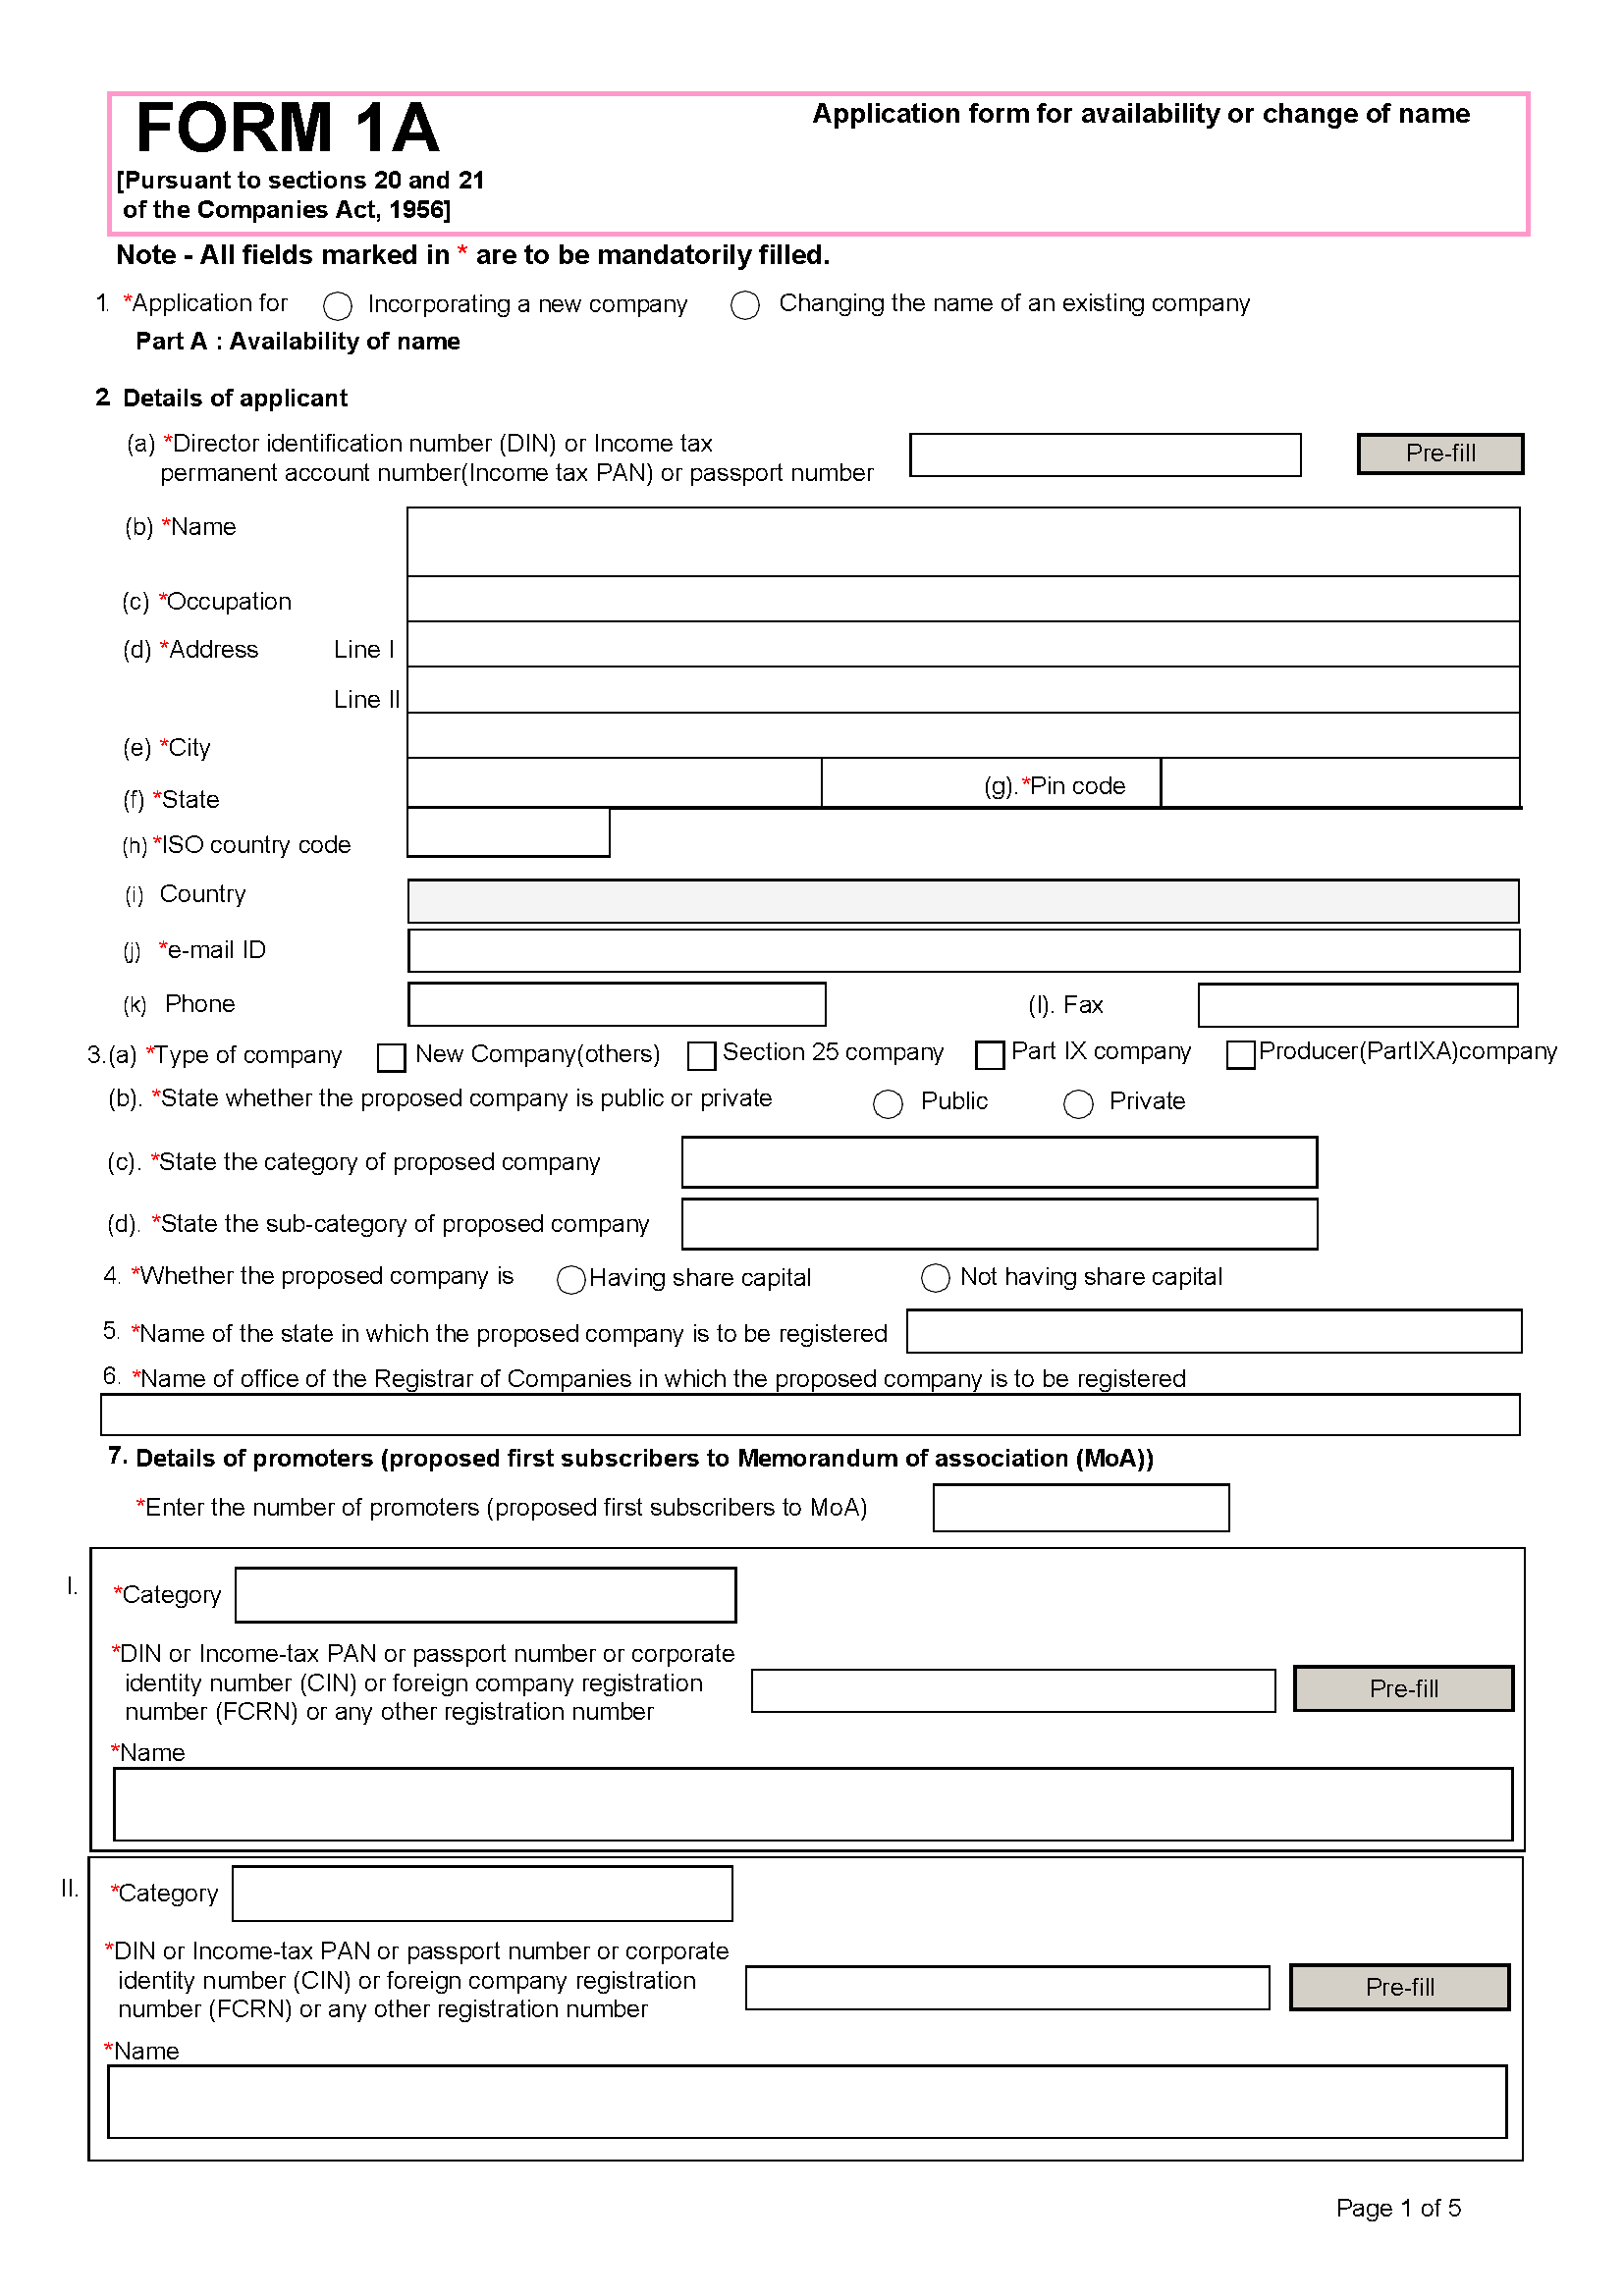 2 - FORM NO. 1A Application form for availability or change of names-converted